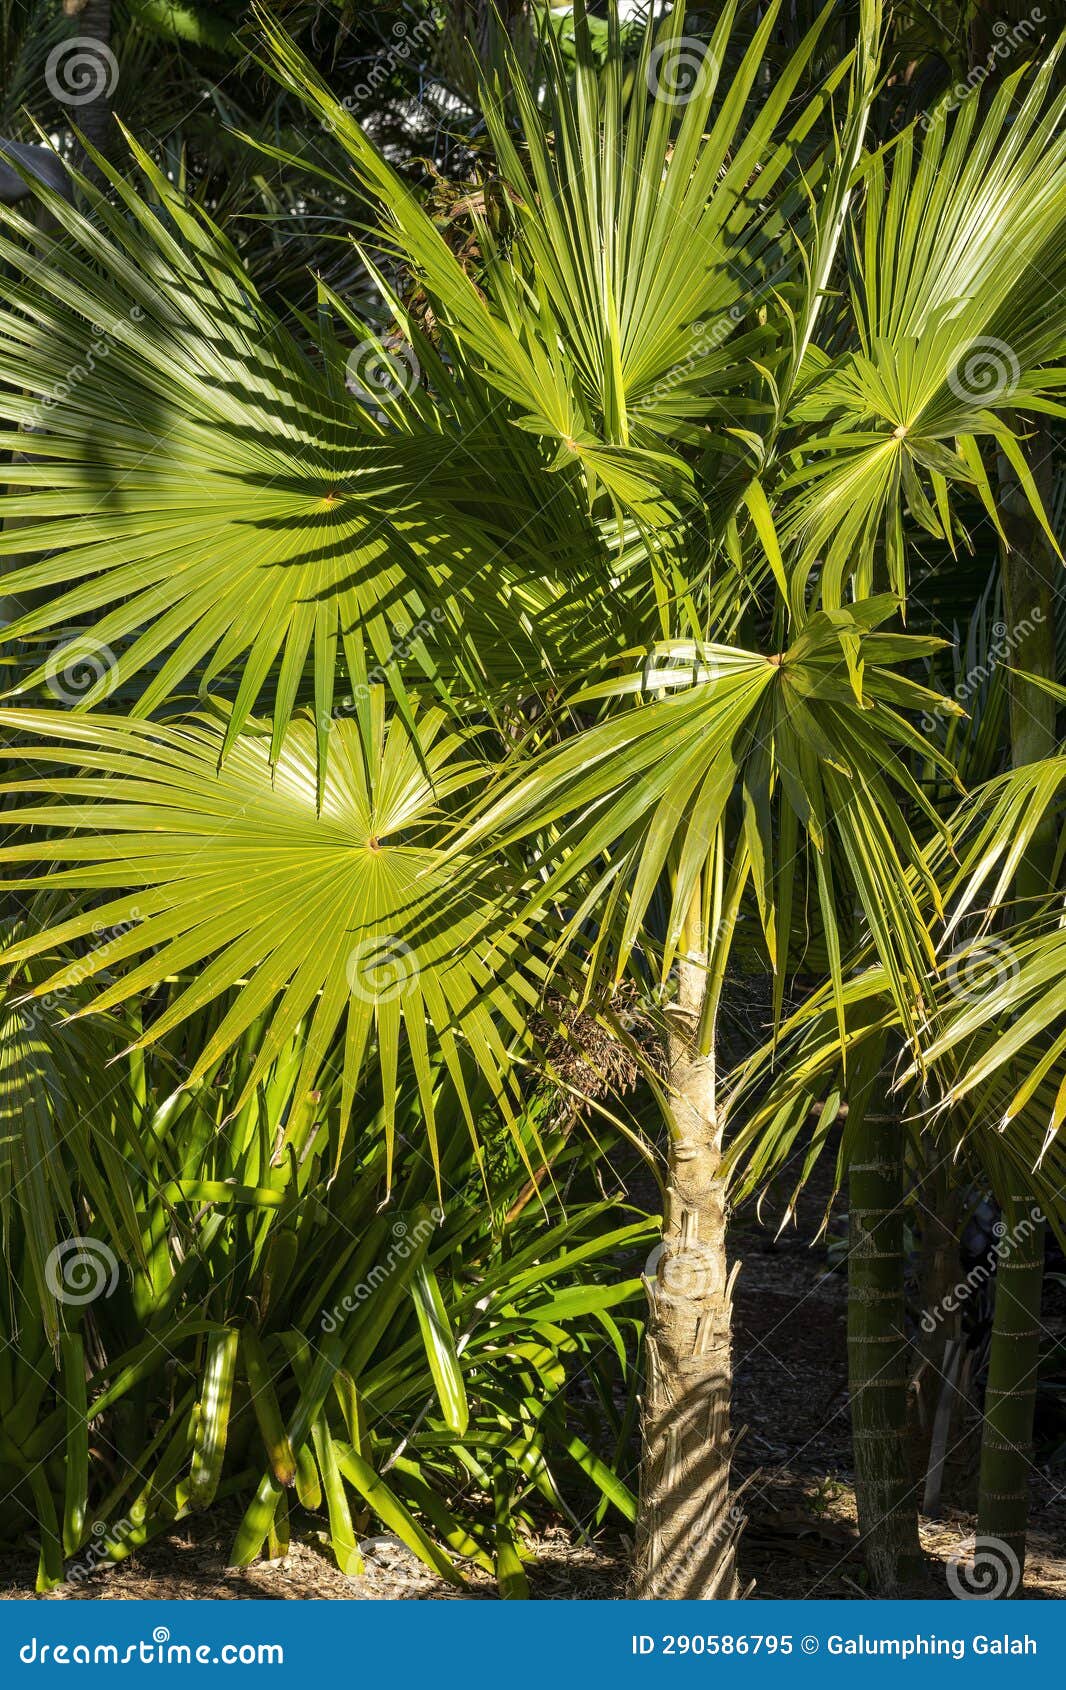 old man palm (coccothrinax crinita), growing is a sunny spot, is native to cuba